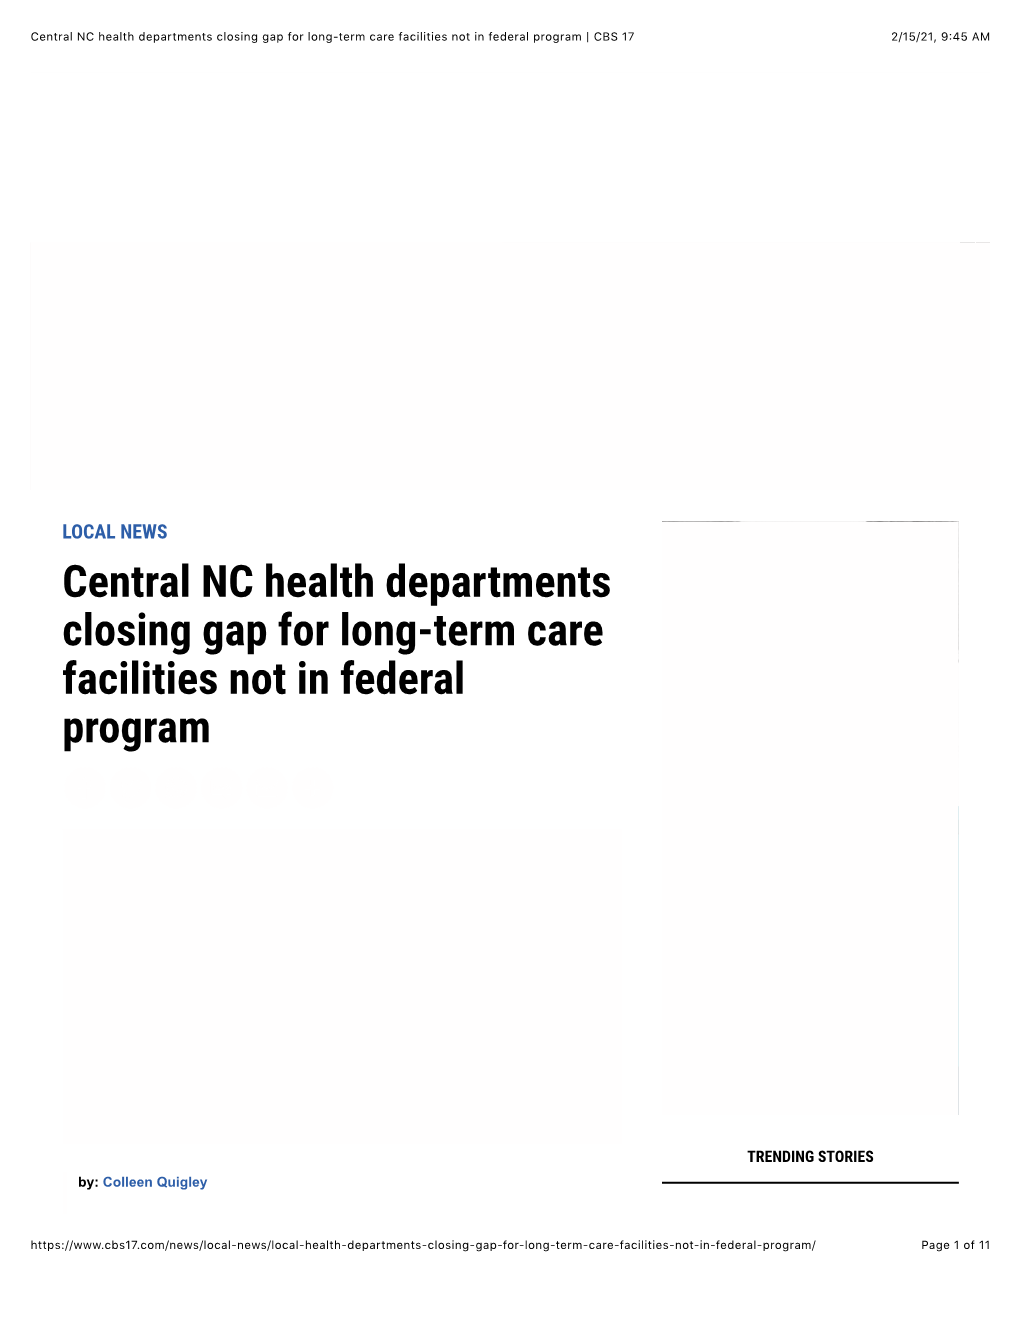 Central NC Health Departments Closing Gap for Long-Term Care Facilities Not in Federal Program | CBS 17 2/15/21, 9�45 AM